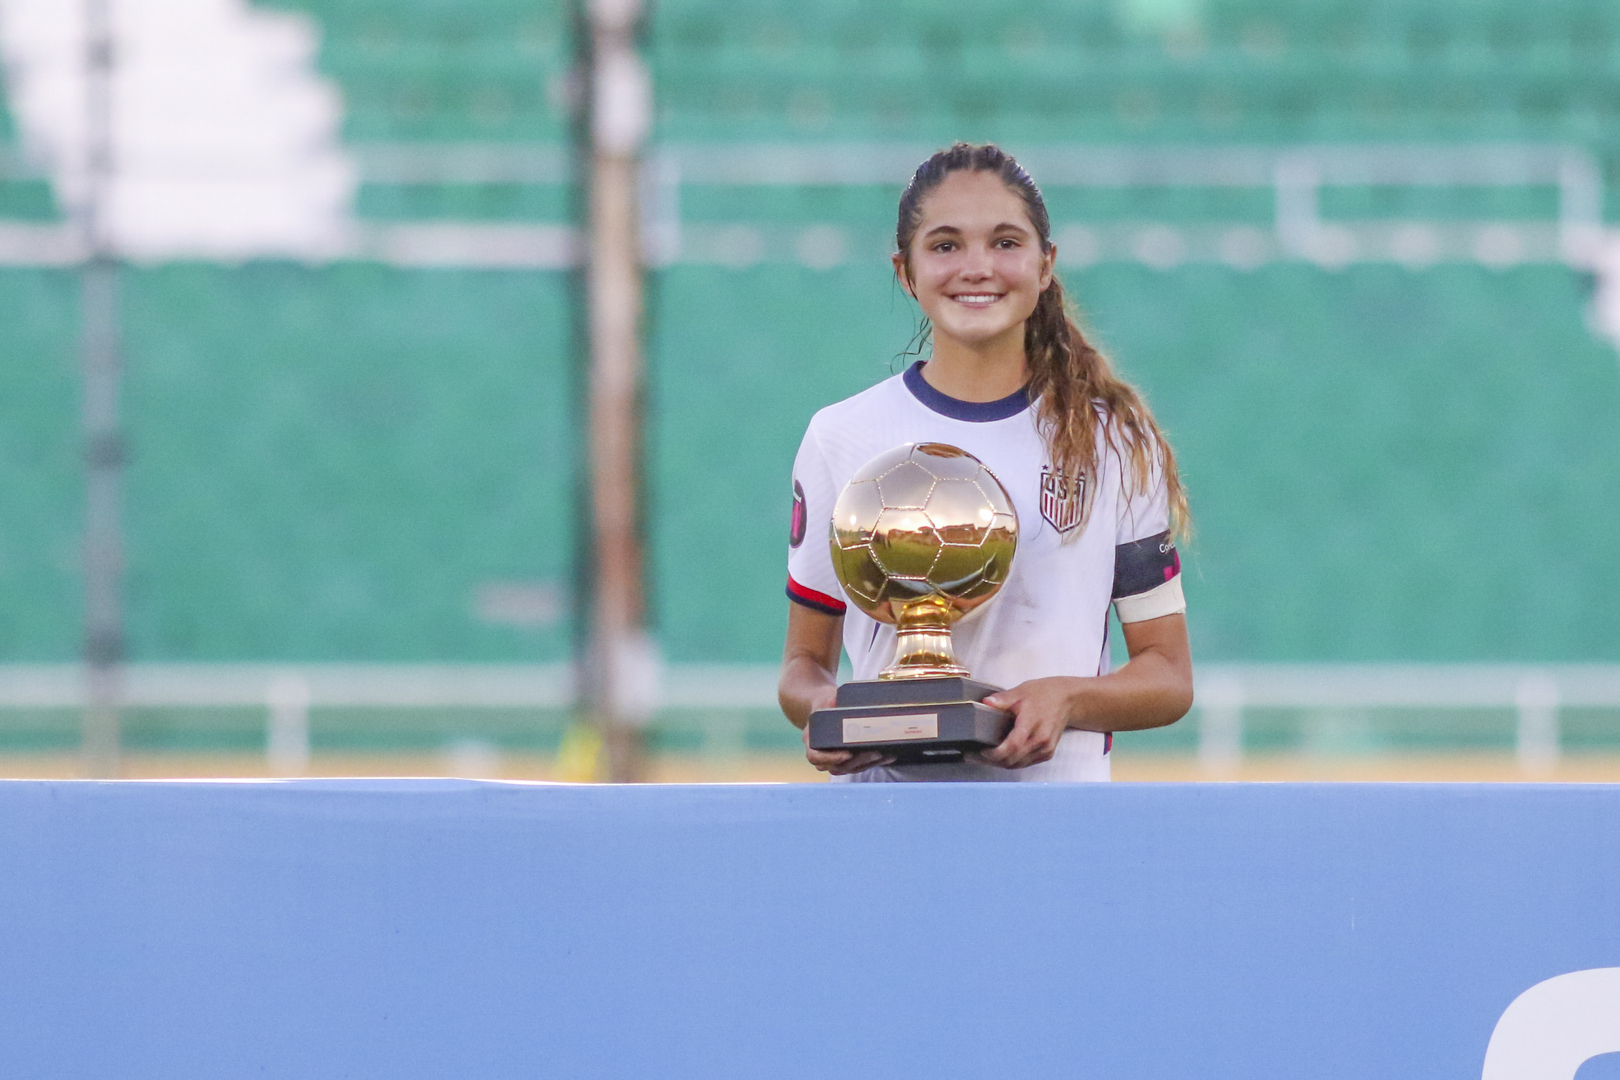 Award winners from 2022 Concacaf Women’s Under17 Championship revealed